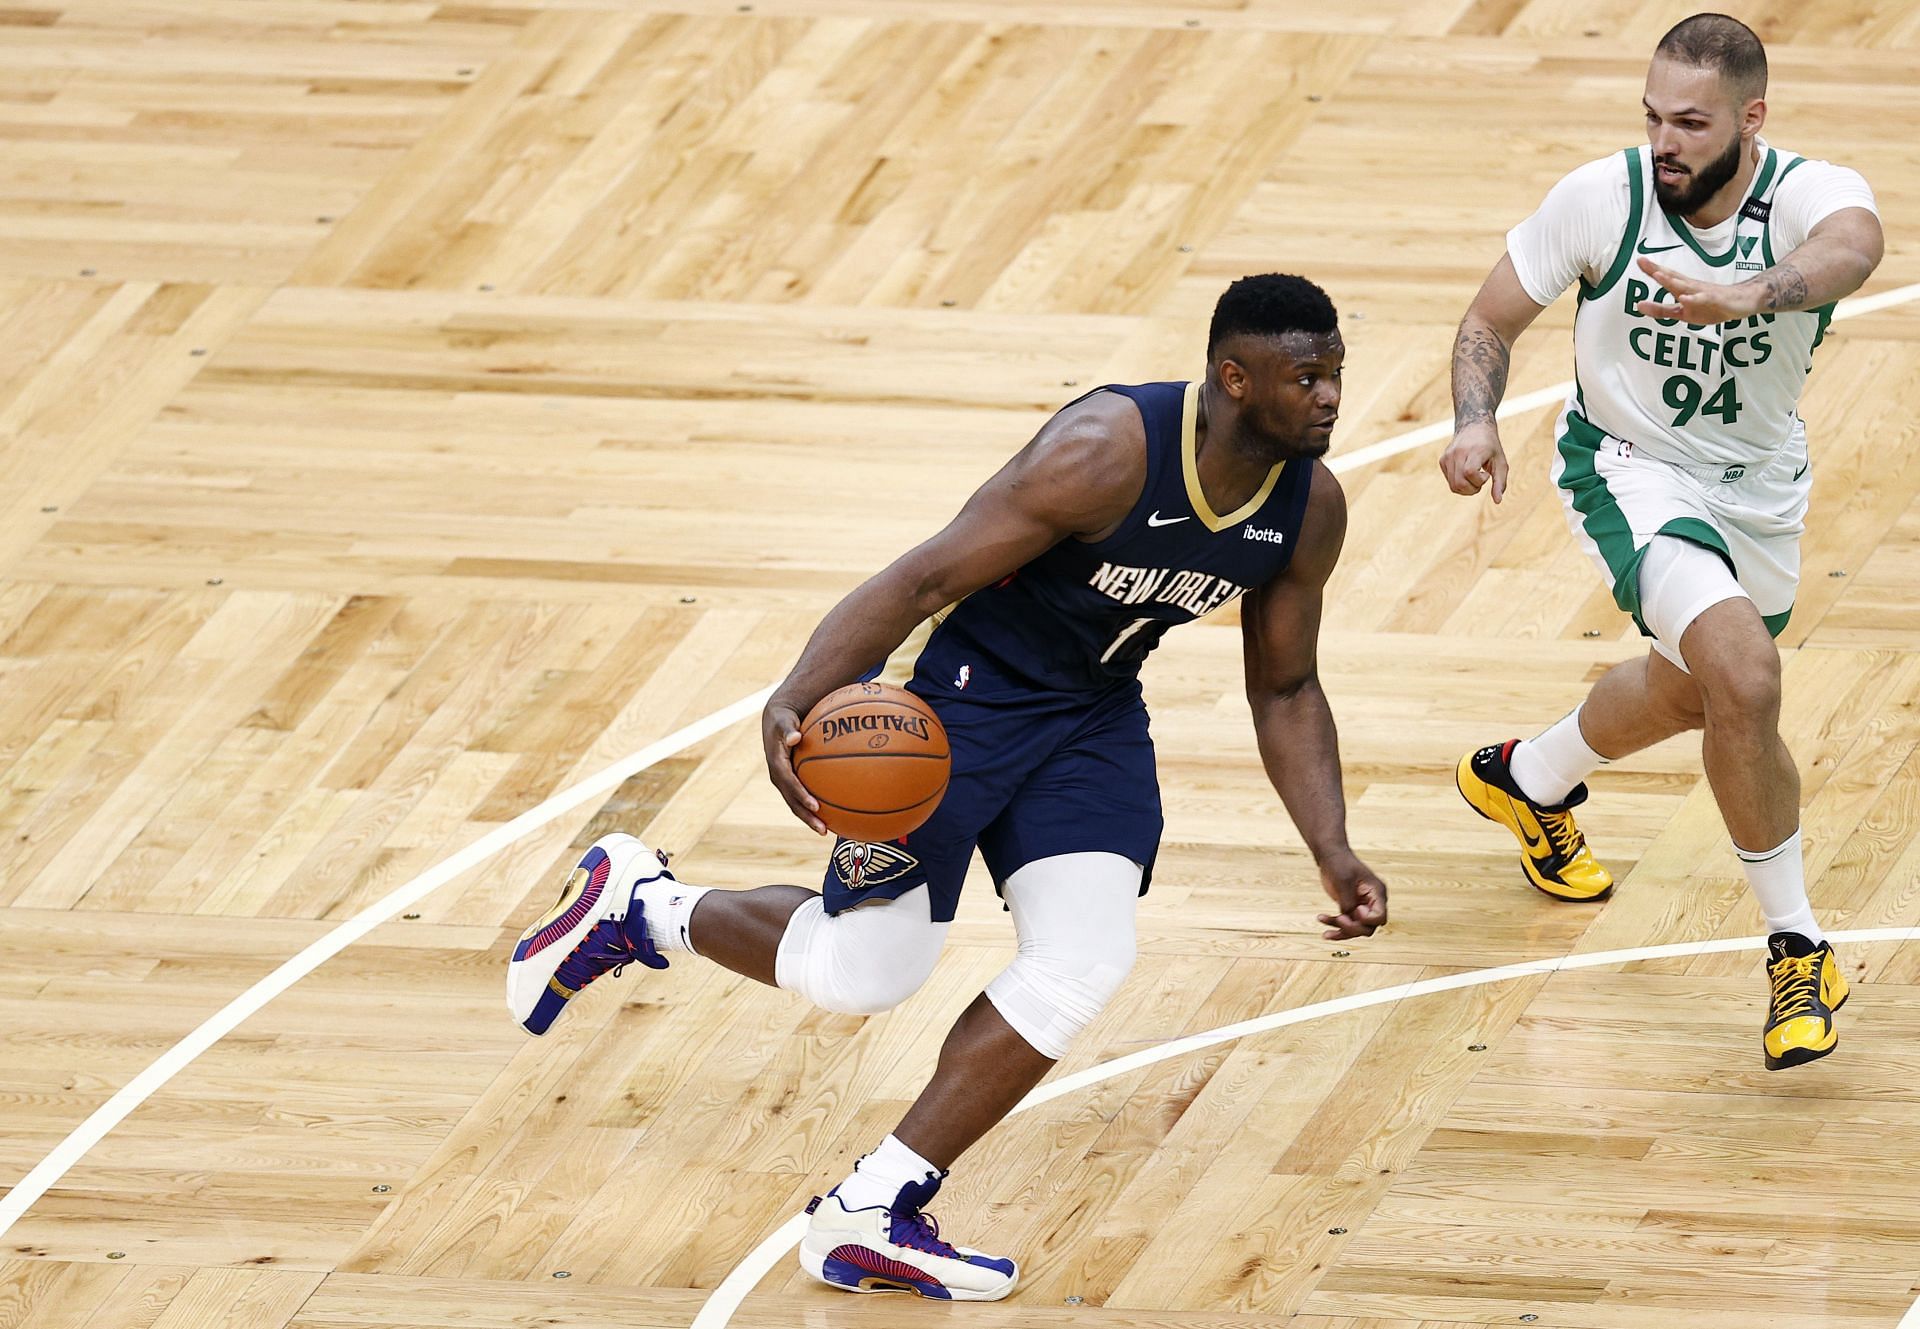 Zion Williamson #1 of the New Orleans Pelicans drives to the basket past Evan Fournier #94 of the Boston Celtics in March 2021